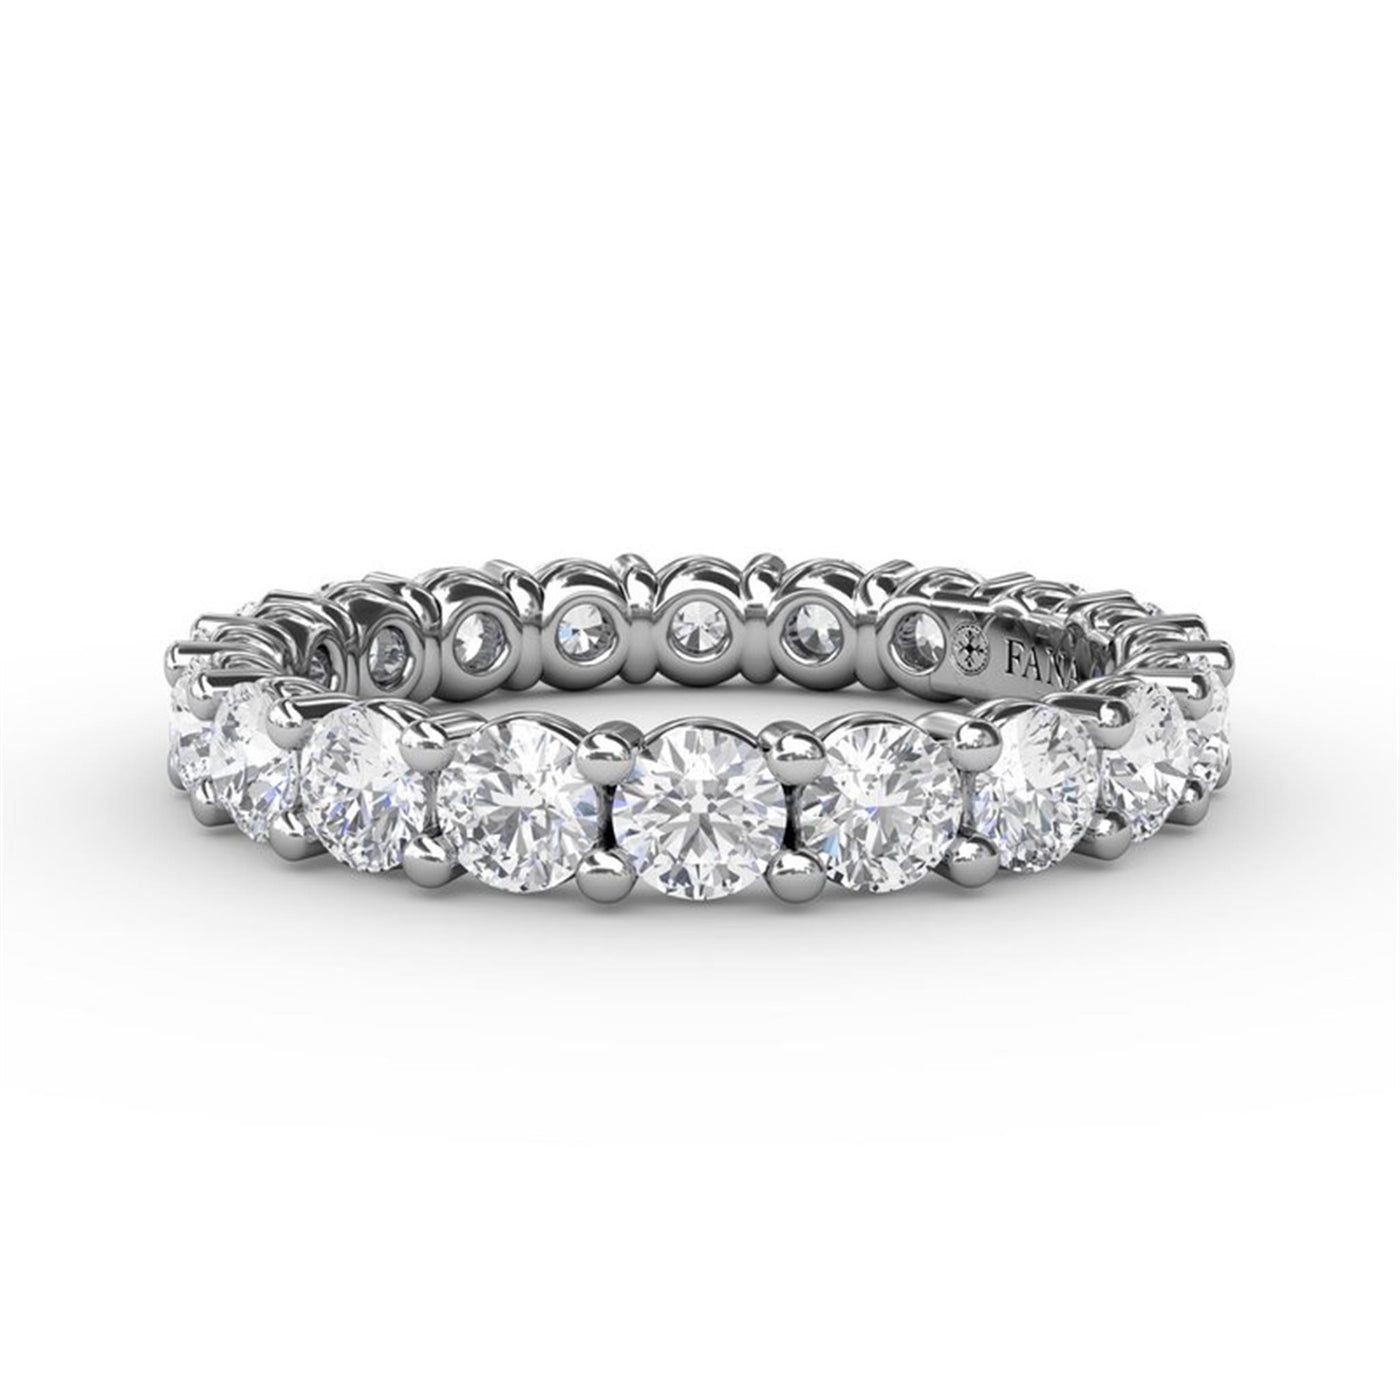 14K White Gold 2.05ctw Diamond Eternity Band 
Featuring a Polished Finish